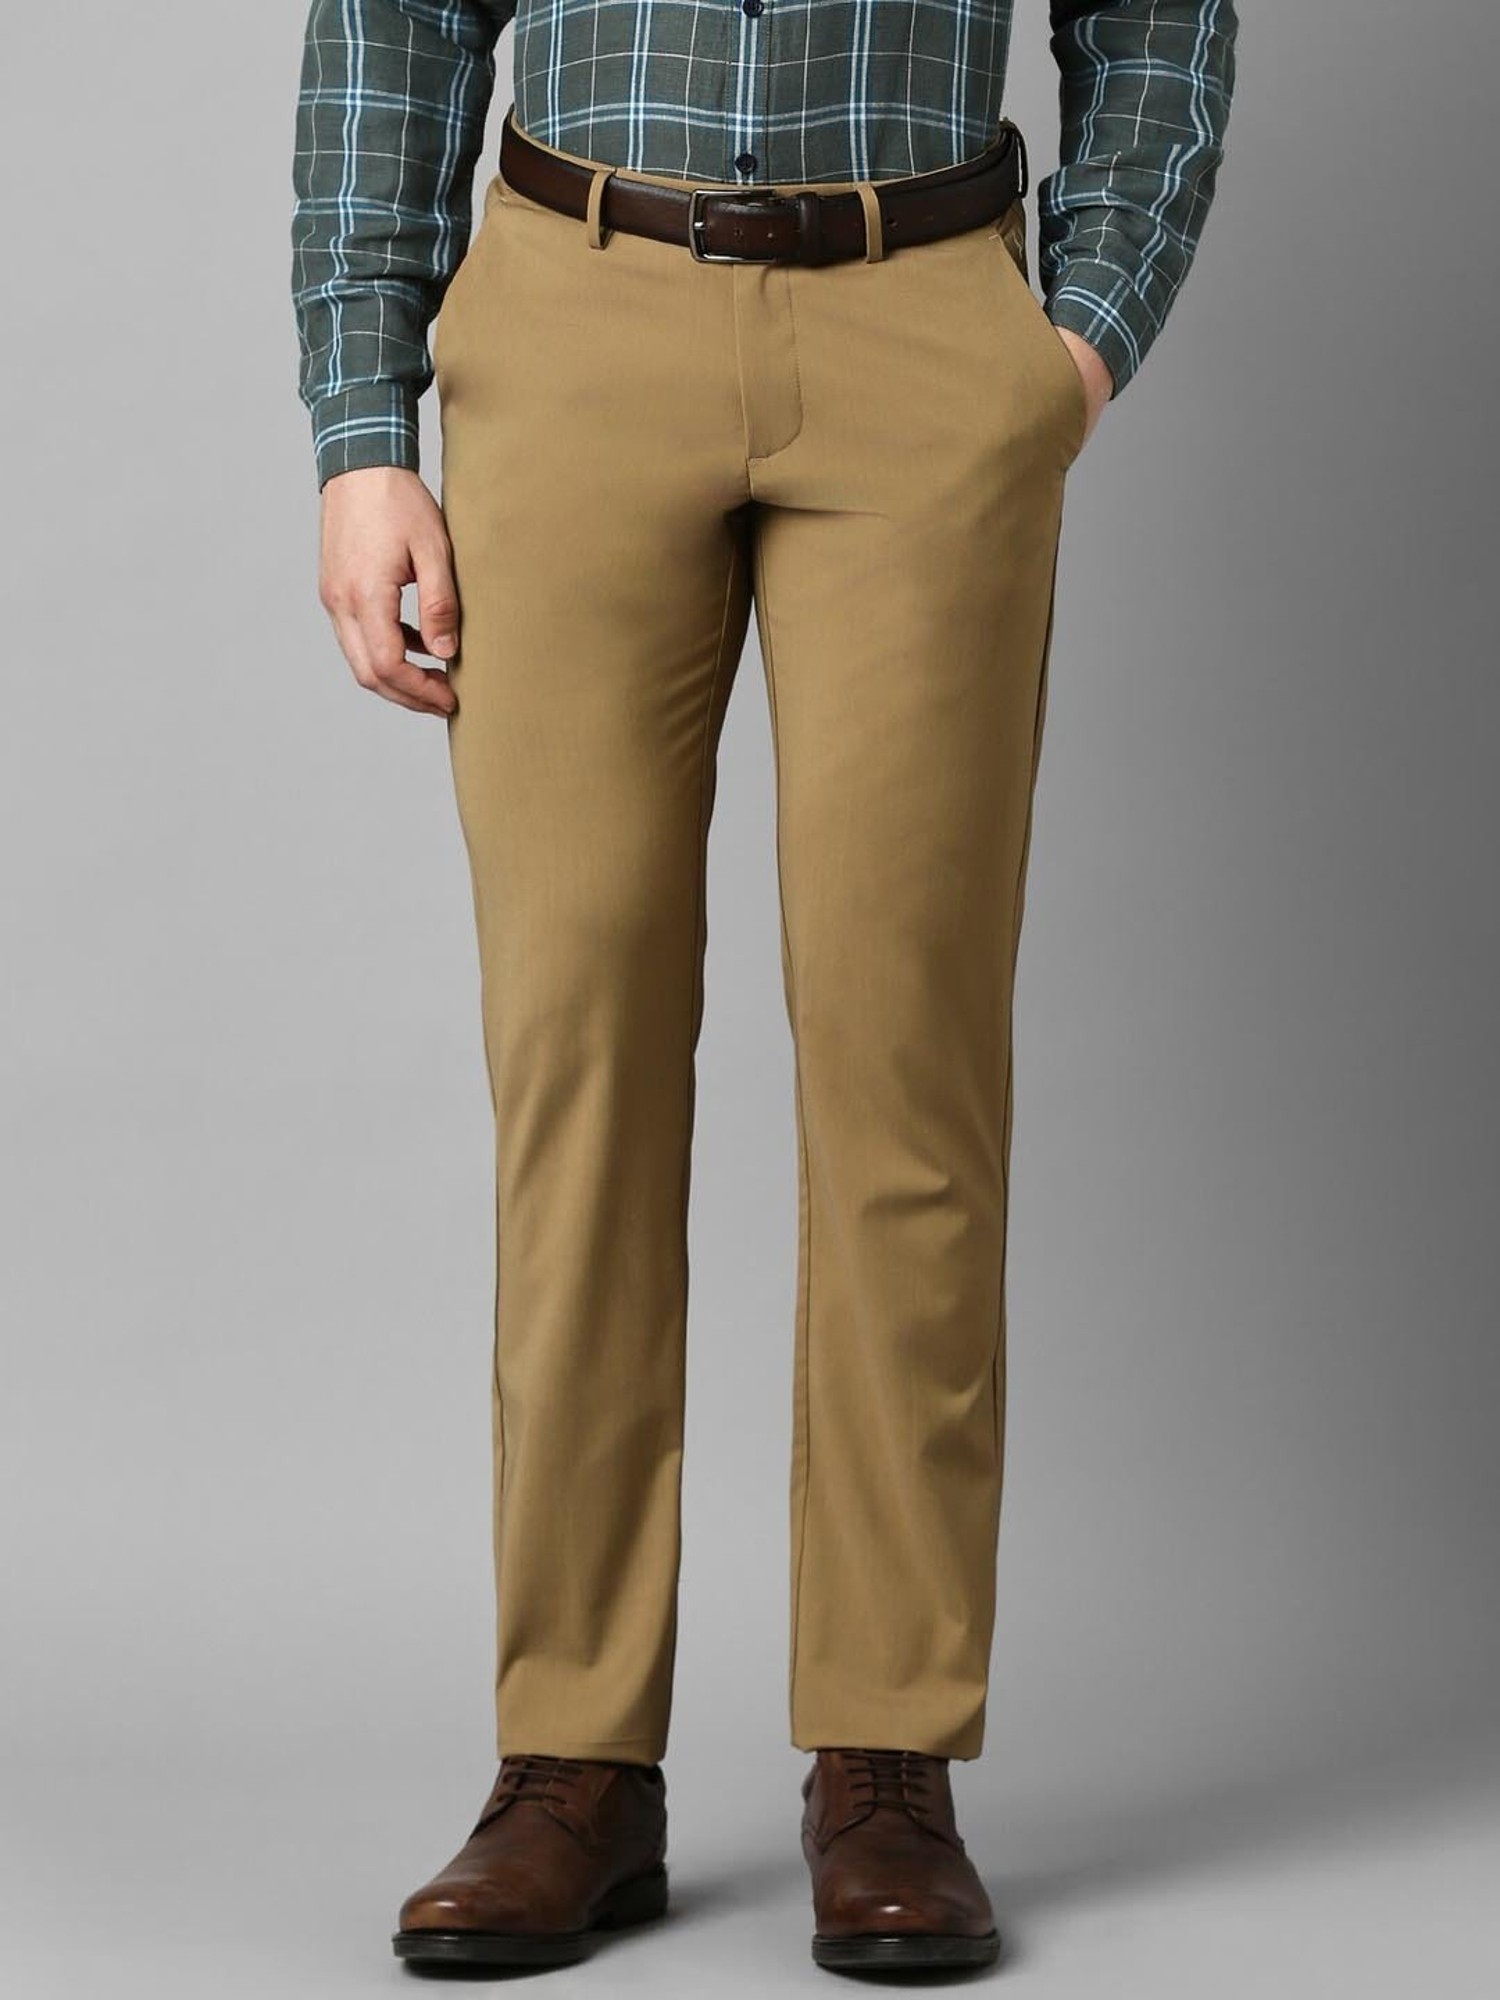 Allen Solly Olive Slim Fit Trousers